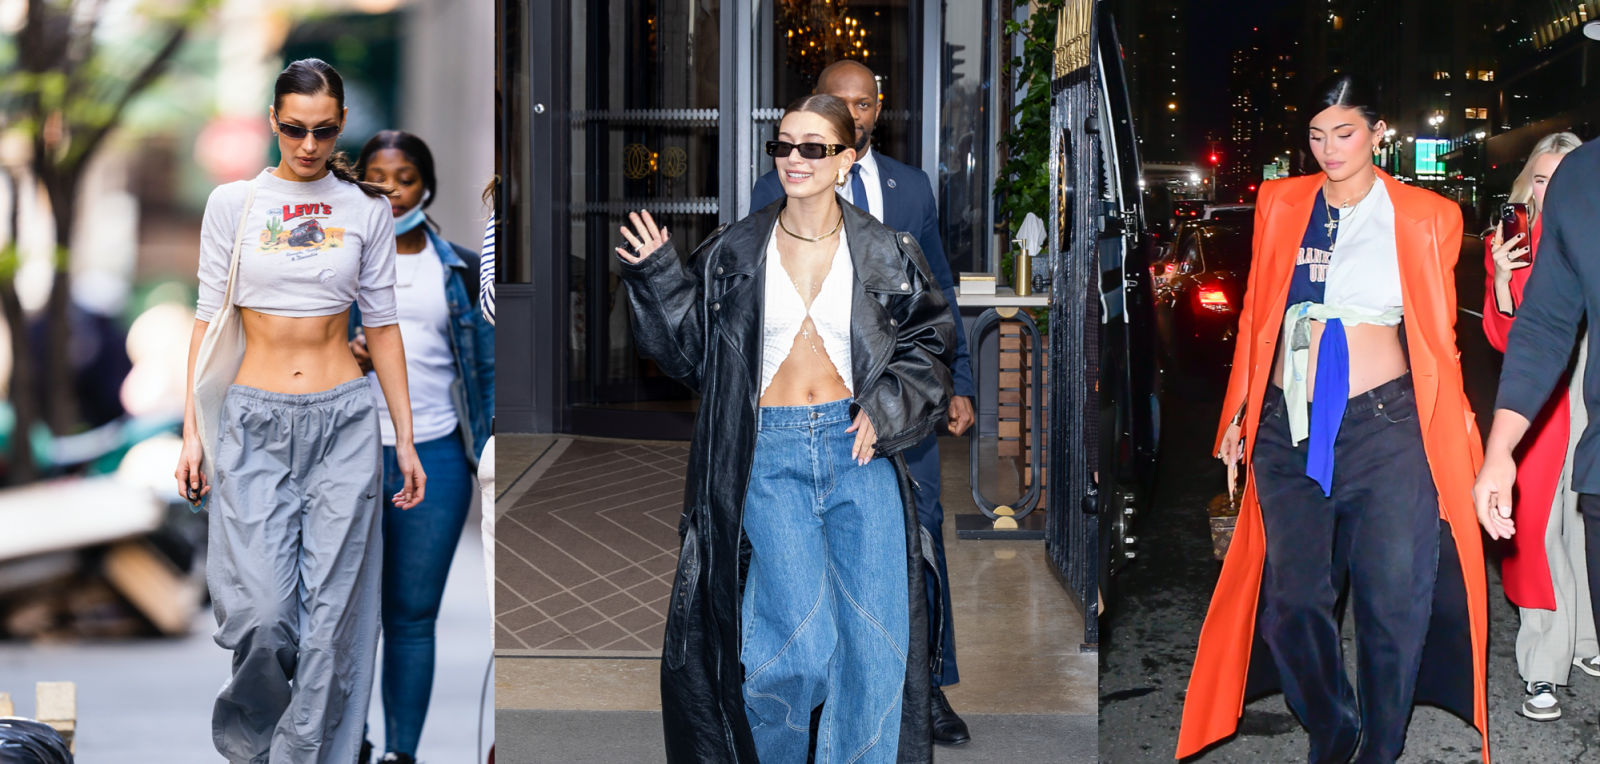 Trend du jour Parachute pants are the latest celebapproved trend to try